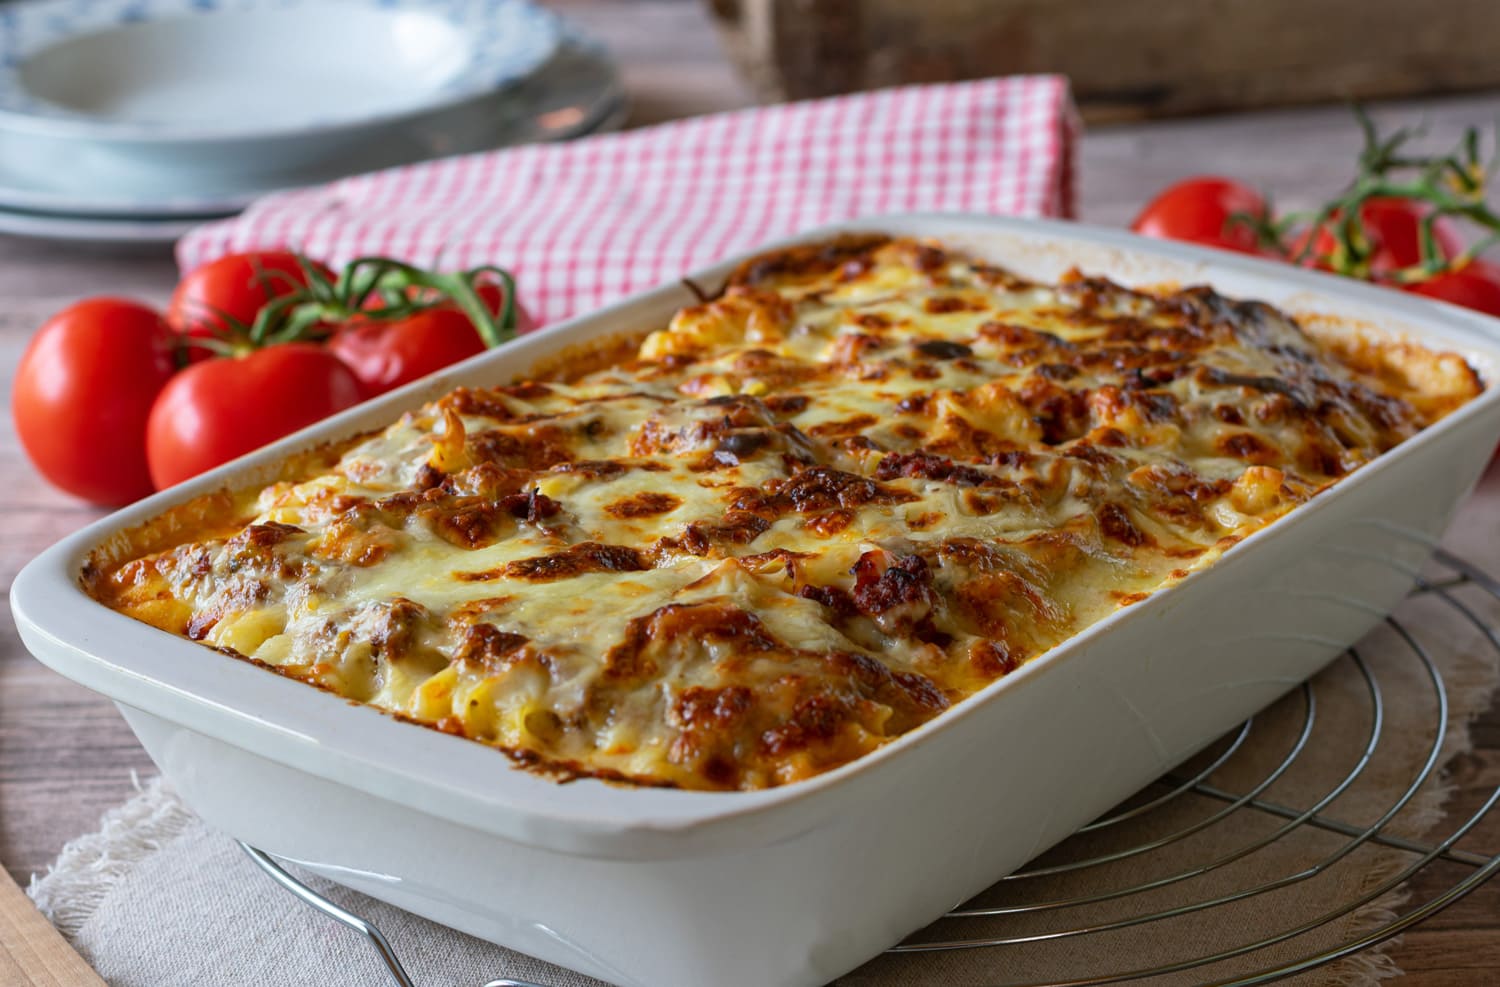 Delicious homemade italian gratin dish with home cooked bolognese sauce and bechamel sauce topped with mozzarella cheese and served in a white baking dish on rustic table background.